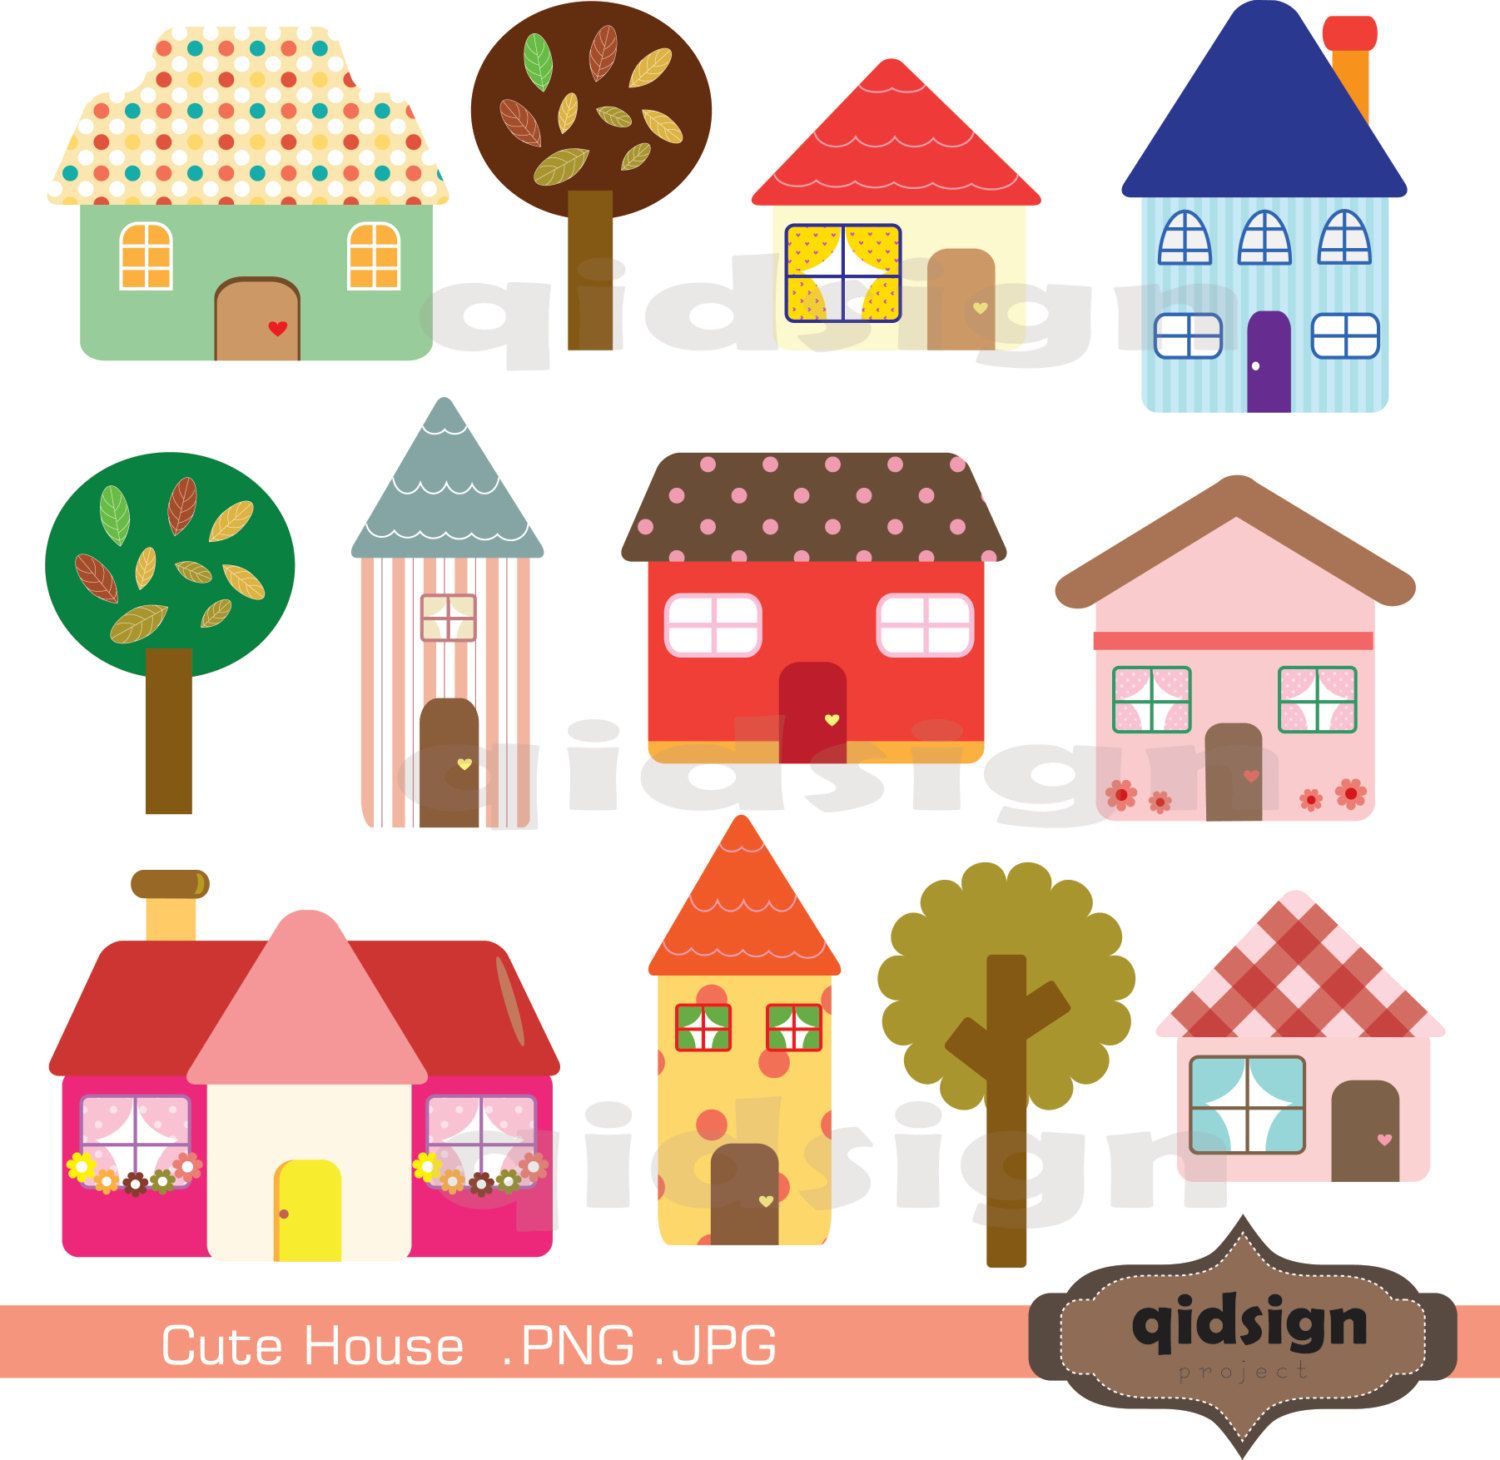 Cute House Clipart Personal and Commercial UseDigital.